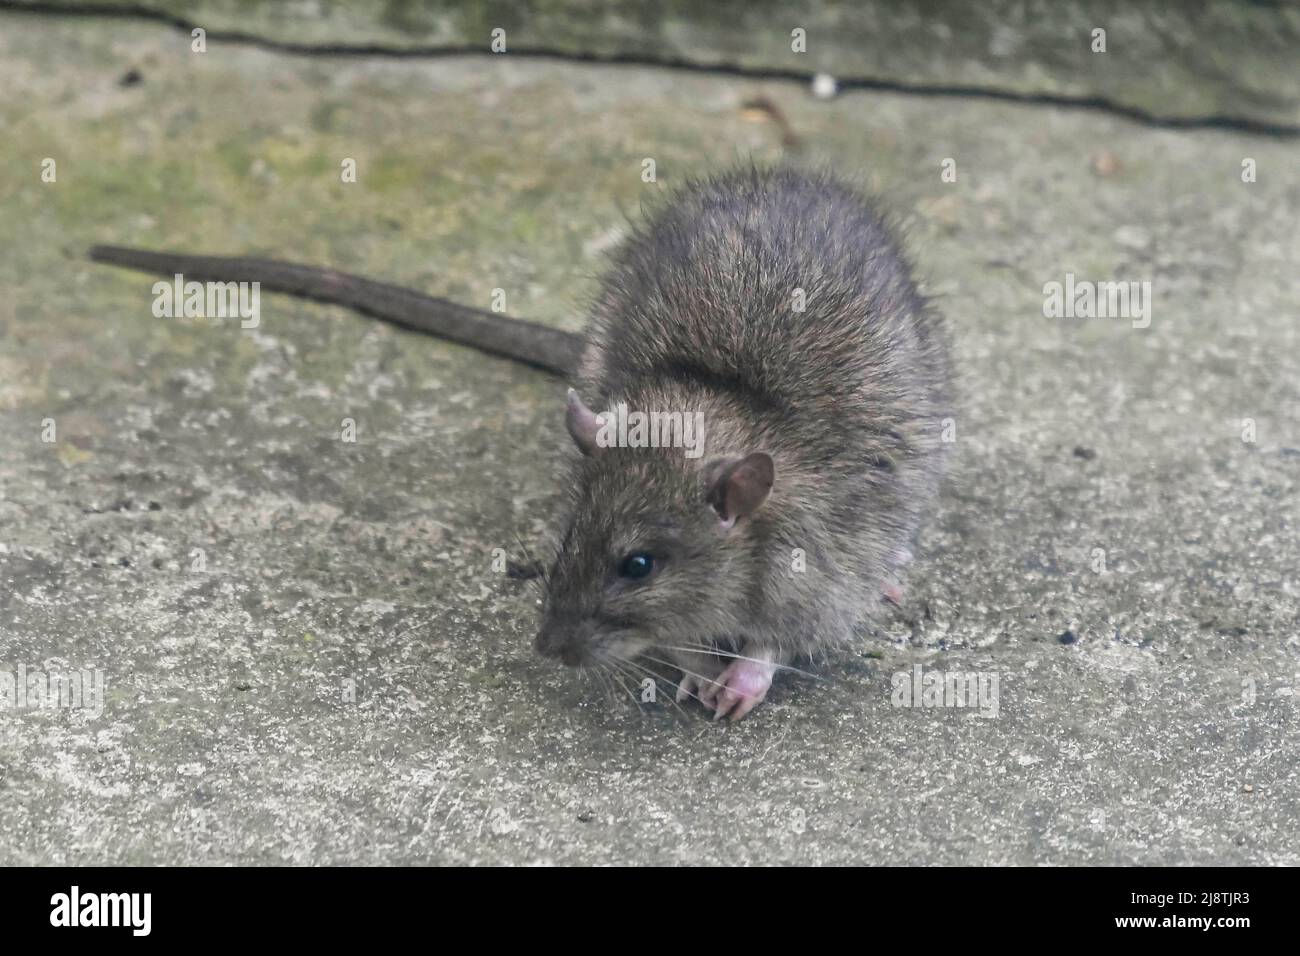 A Brown Rat - Rattus norvegicus on a patio looking for food dropped from a bird feeder.  Picture Credit: Graham Hunt/Alamy Stock Photo